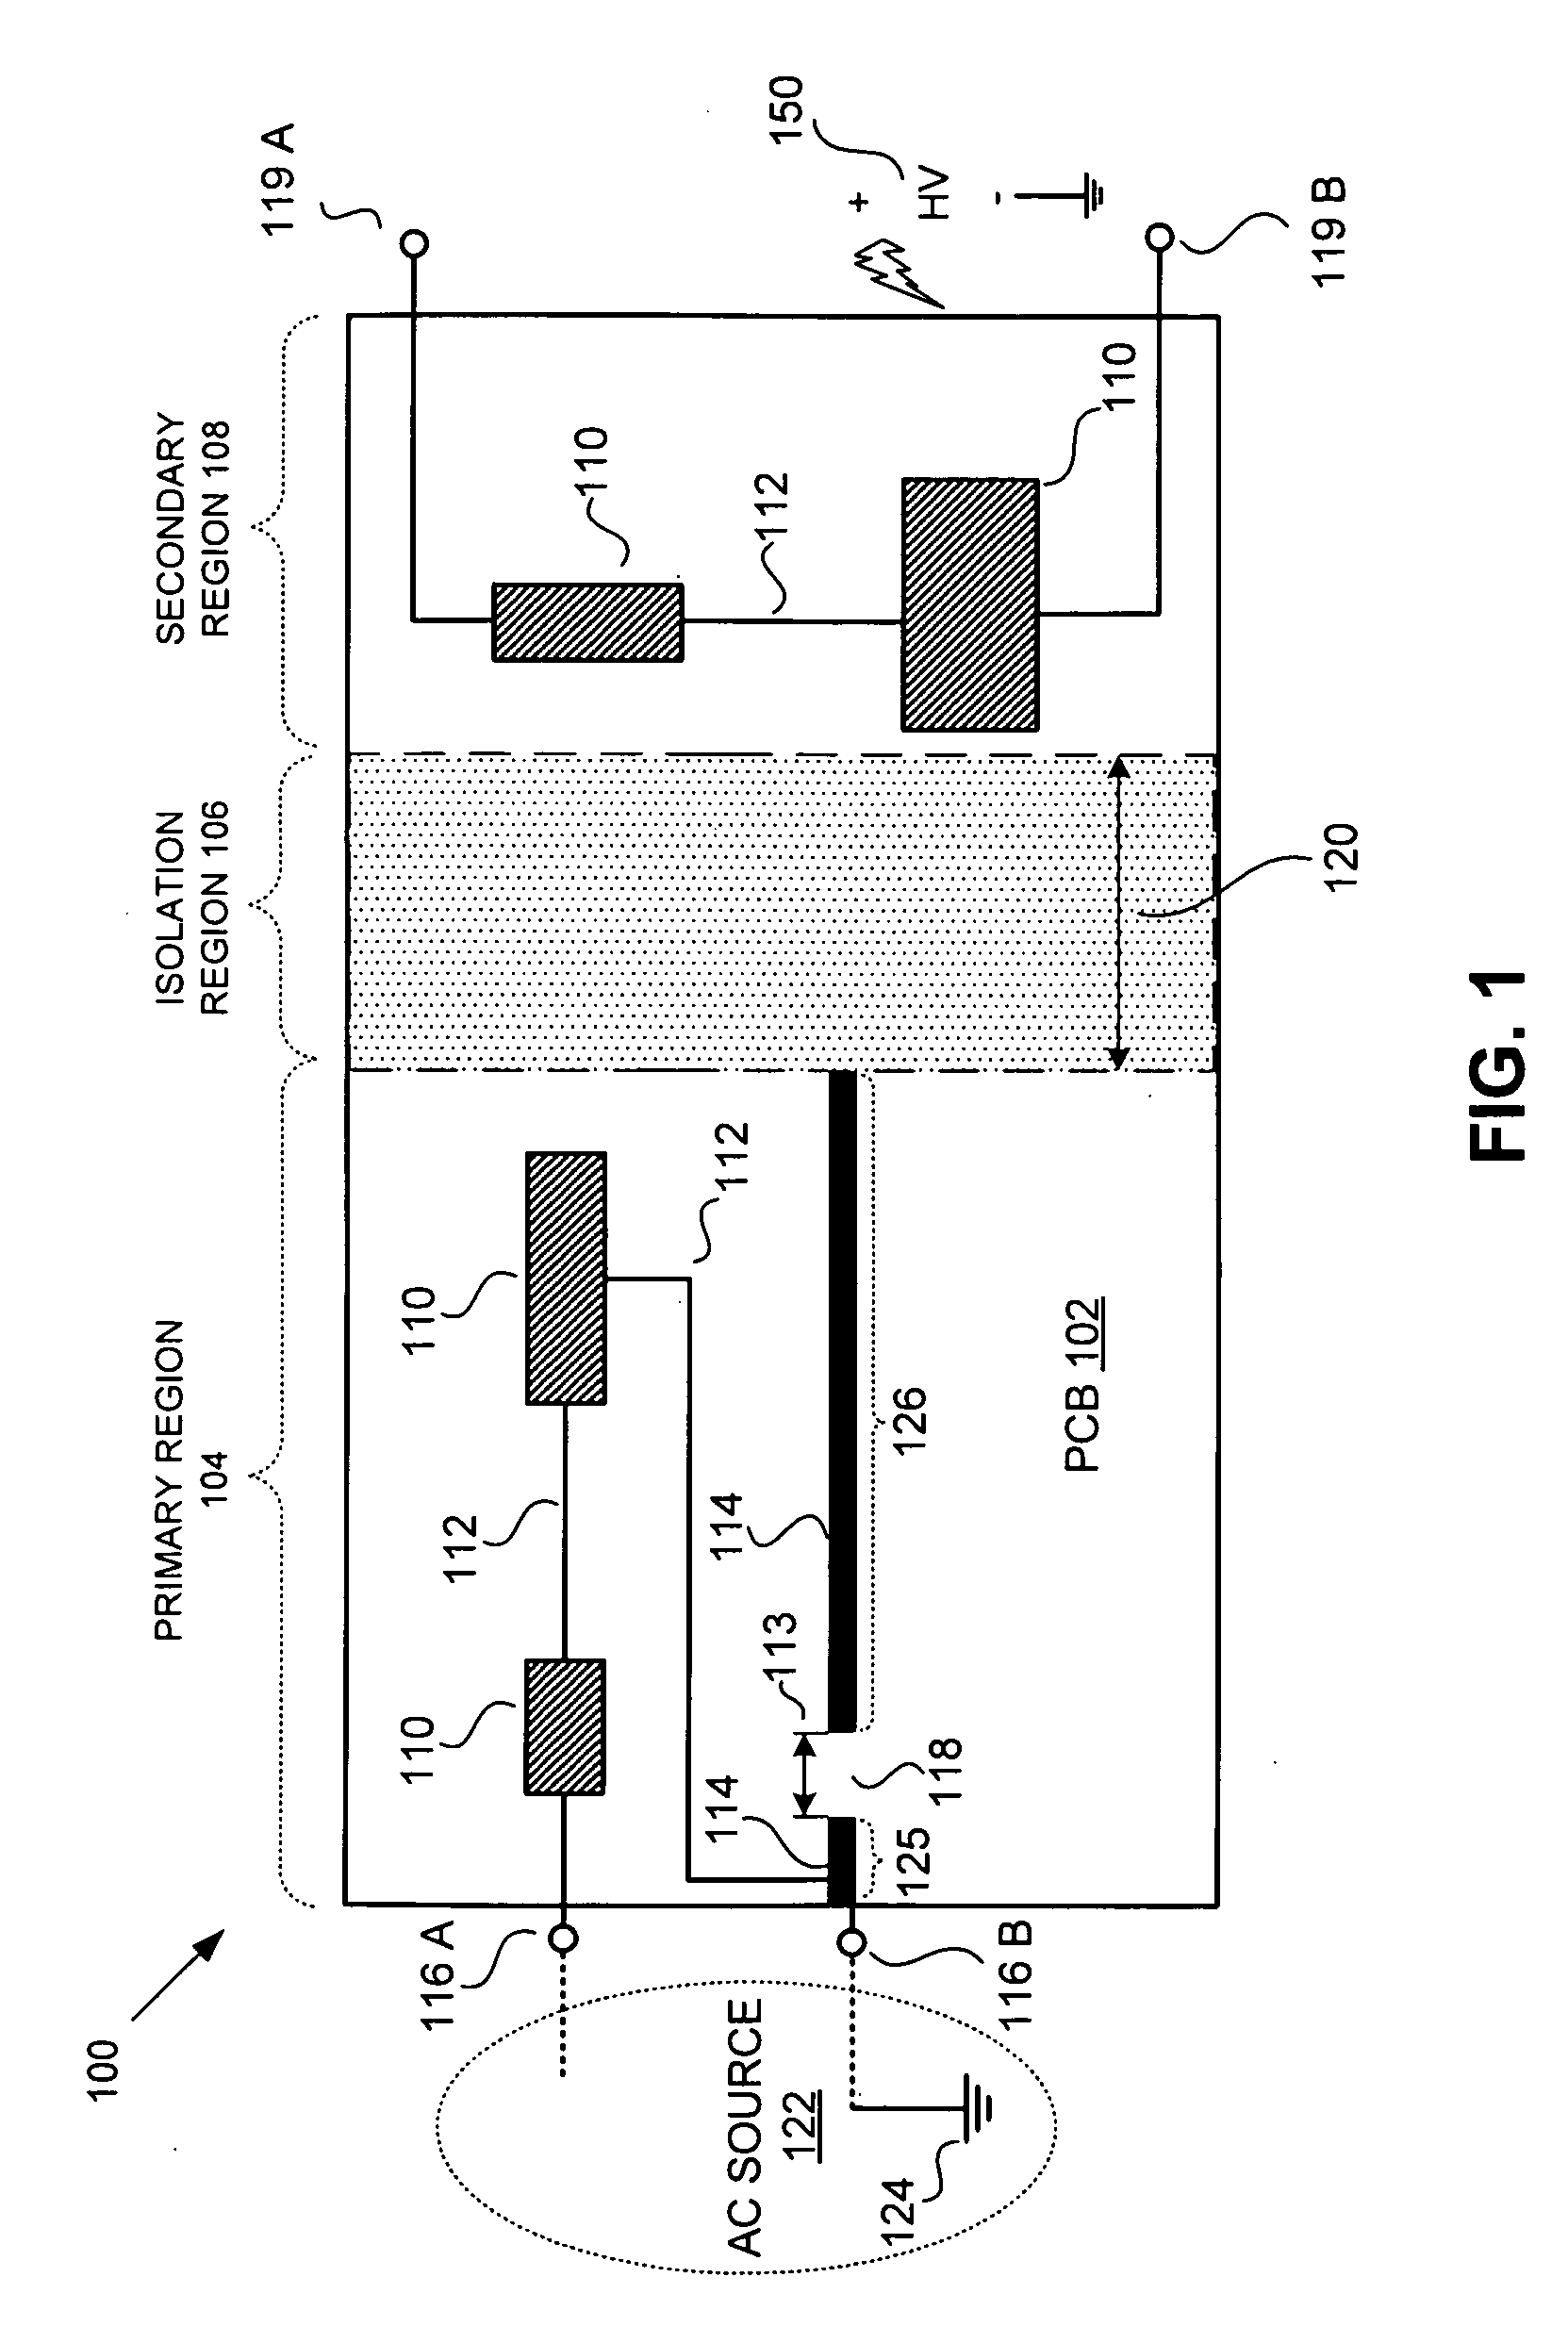 Electrostatic discharge conducting pathway having a noise filter spark gap